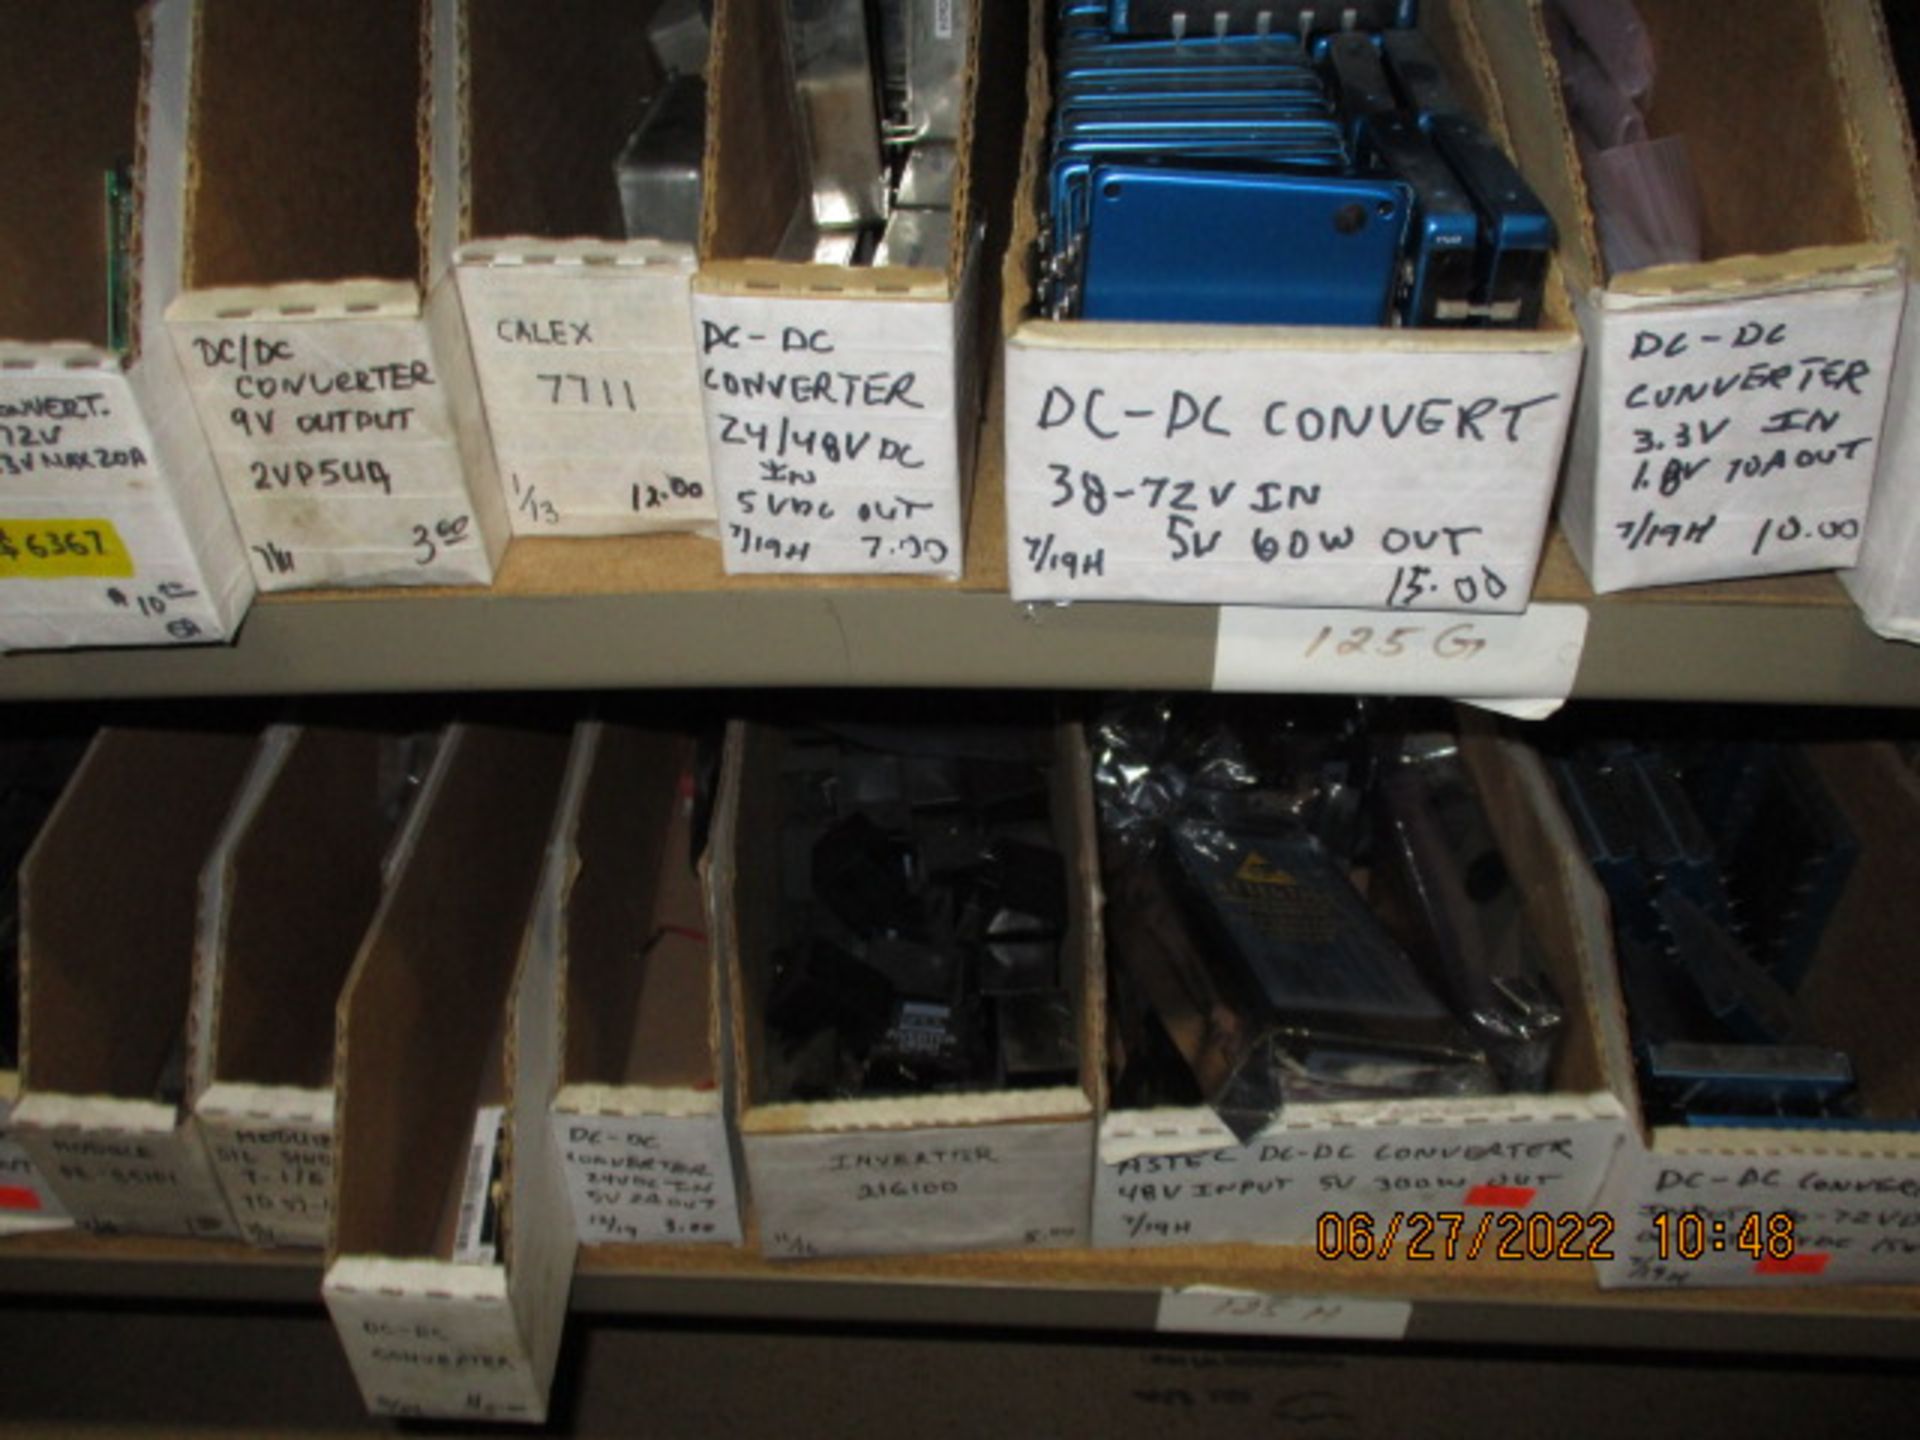 CONTENTS OF SHELVING UNIT CONSISTING OF SMD DIODES, SMD FILTERS, DC/DC CONVERTERS, MODULES, POWER - Image 7 of 7